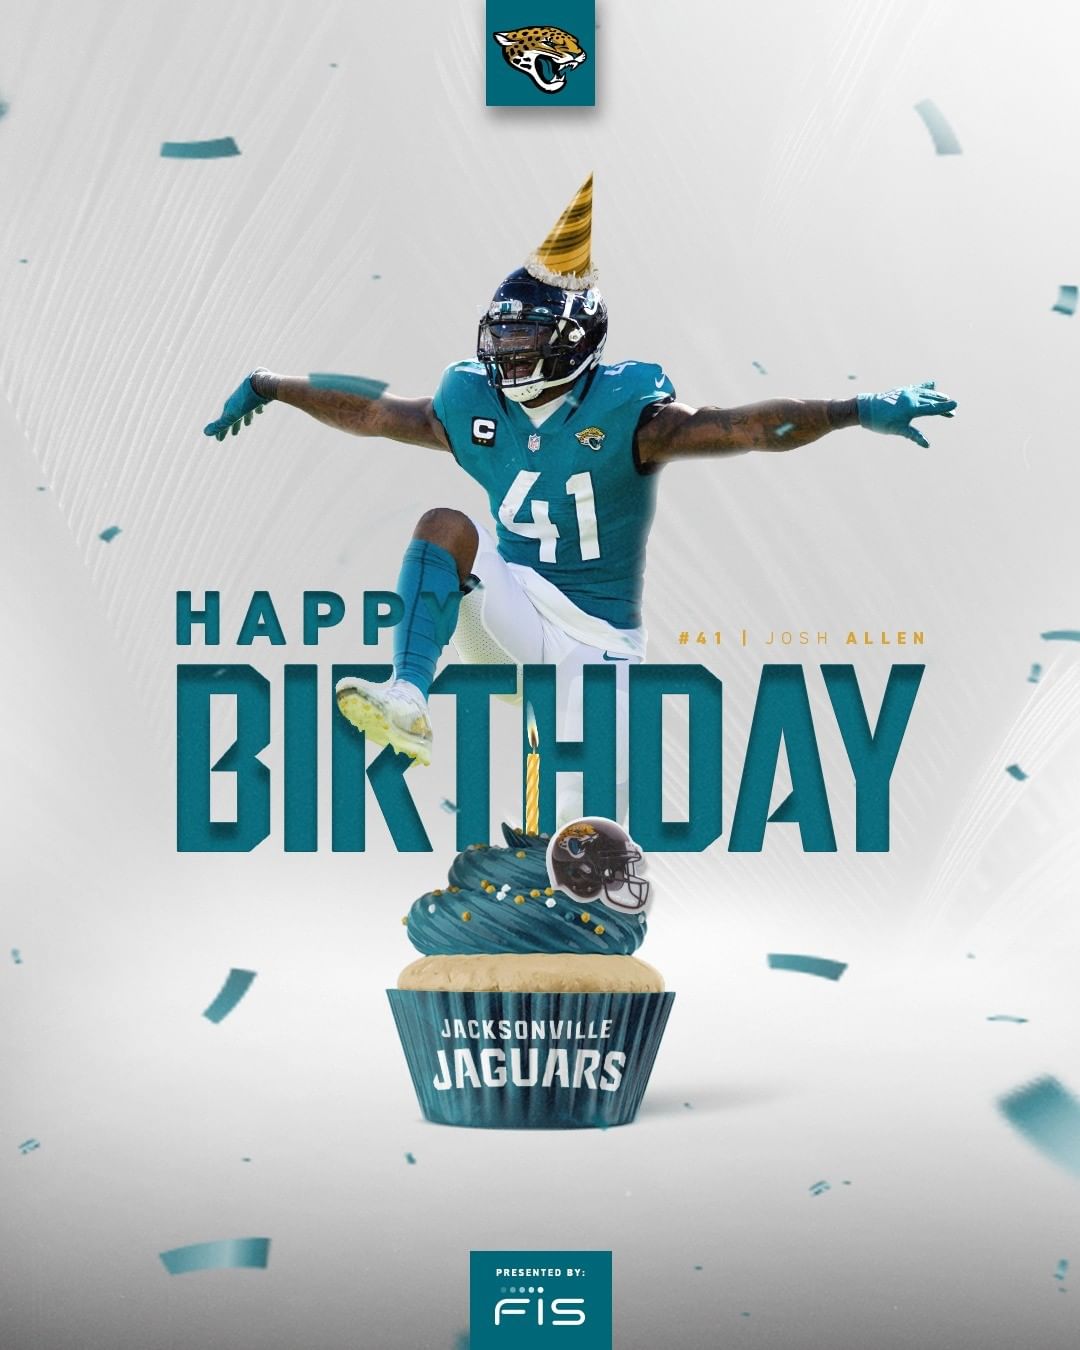 Show our guy @joshallen_41 some birthday love in the comments!  @fis_global | #...